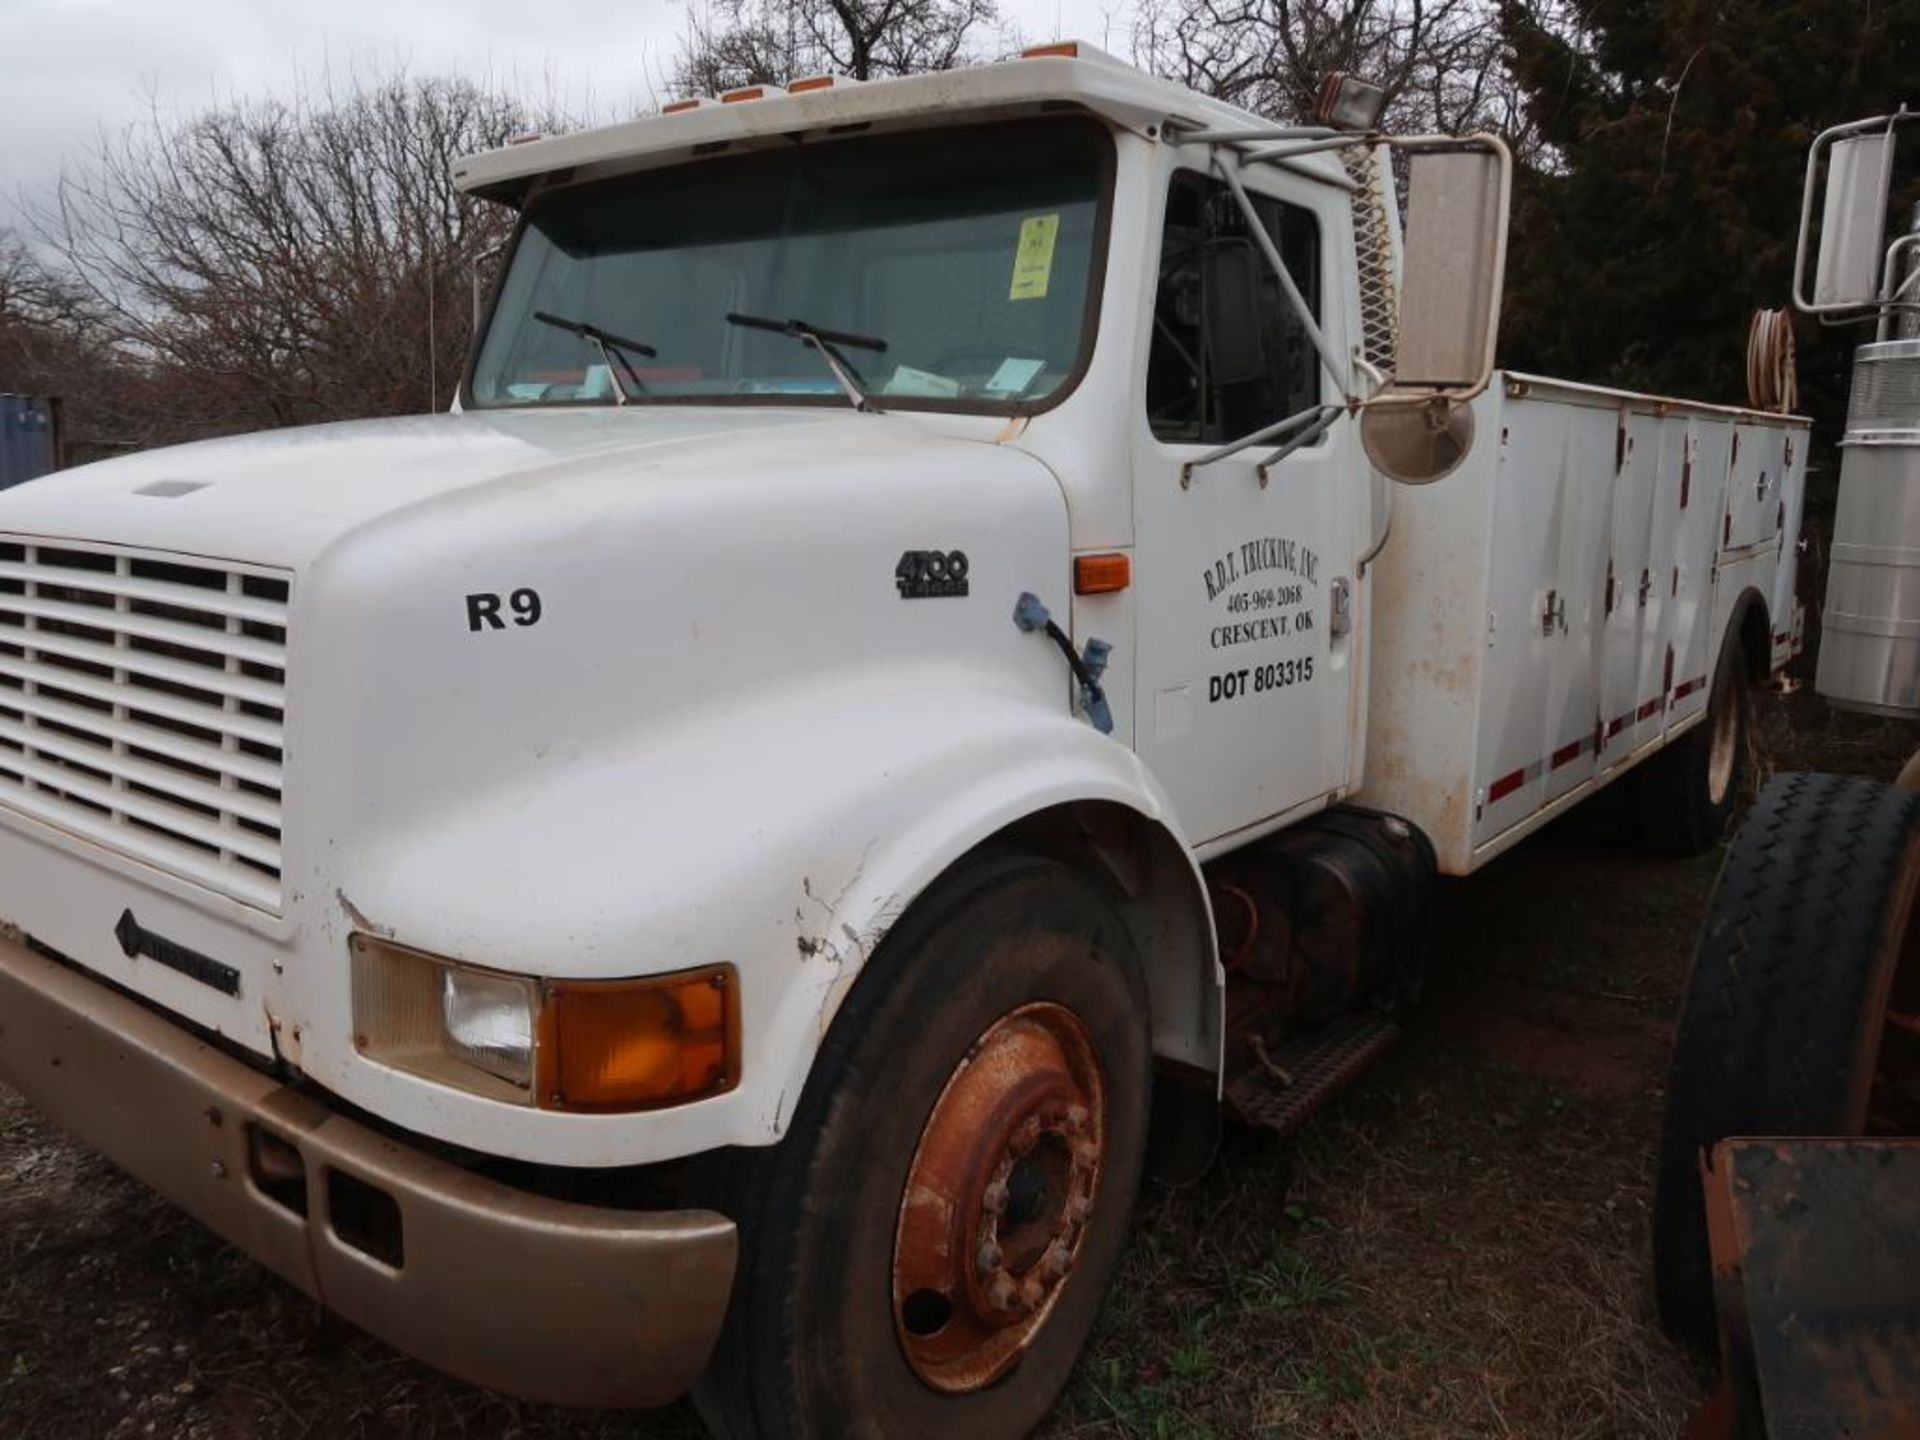 1998 International Model 4700, Utility Truck, (AS IS - NOT IN SERVICE - NO TITLE), VIN: 1HTSCABM8WHS